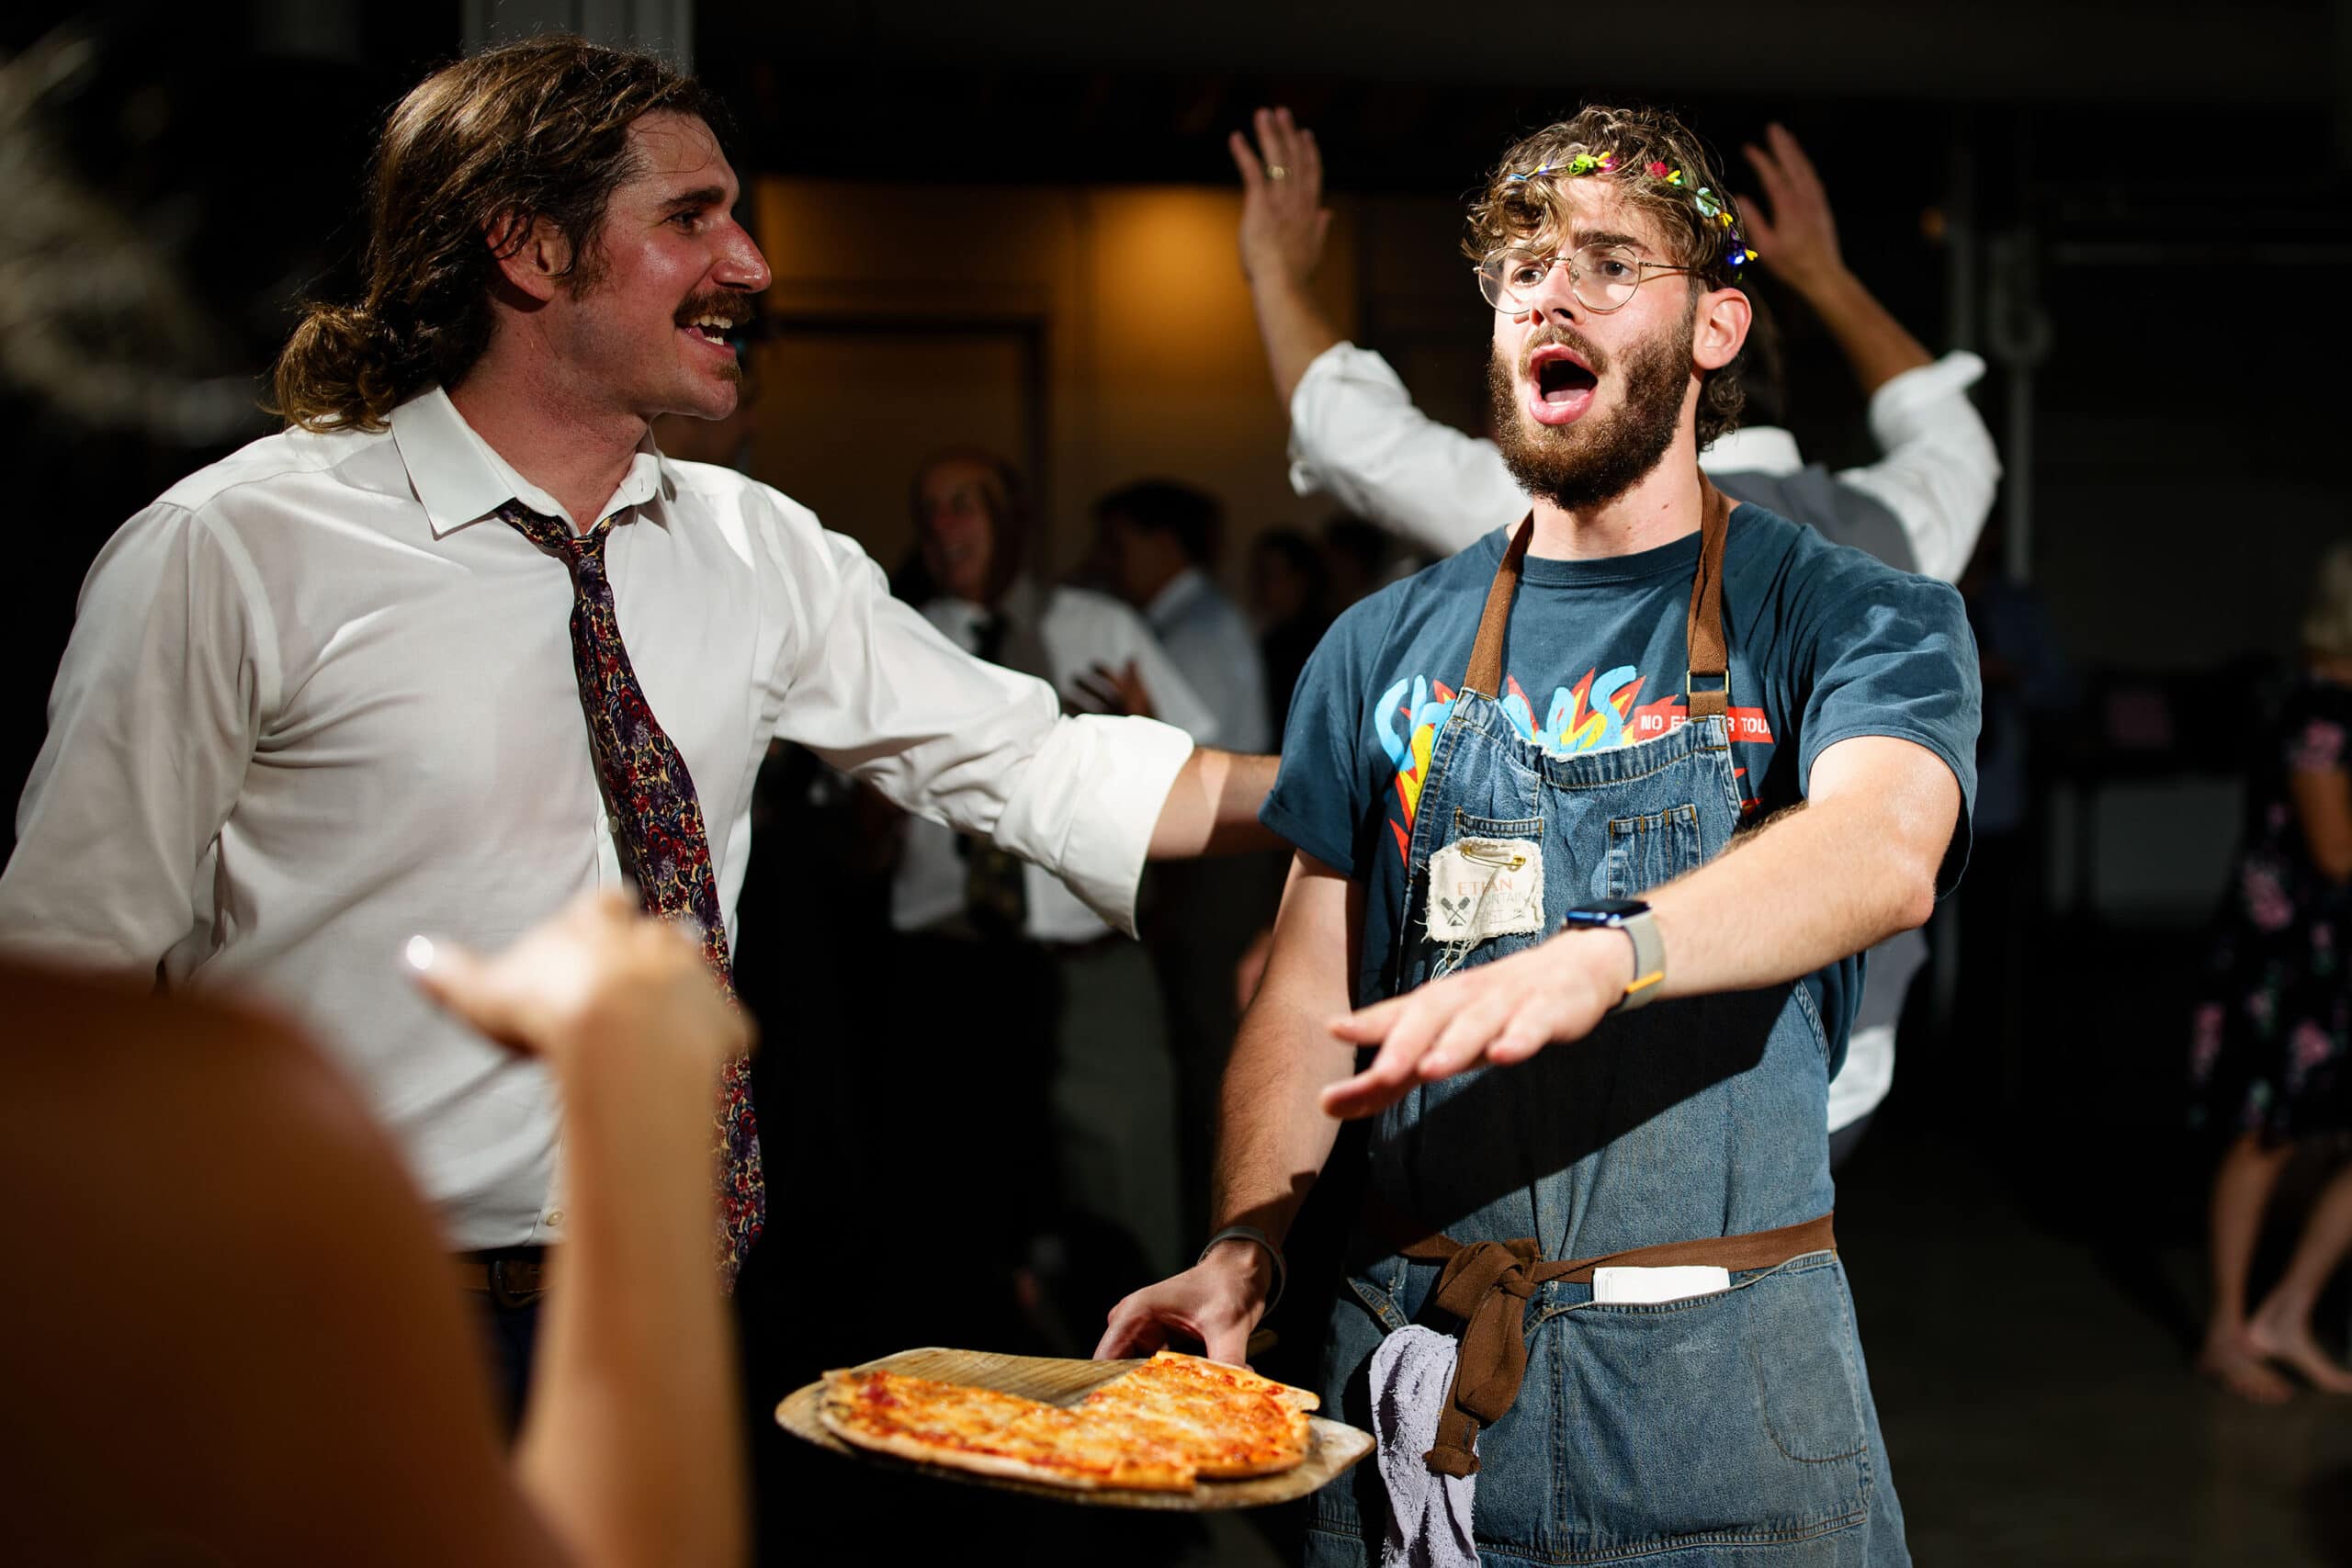 Mountain Crust Pizza delivers a late night snack to the dance floor at Blanc